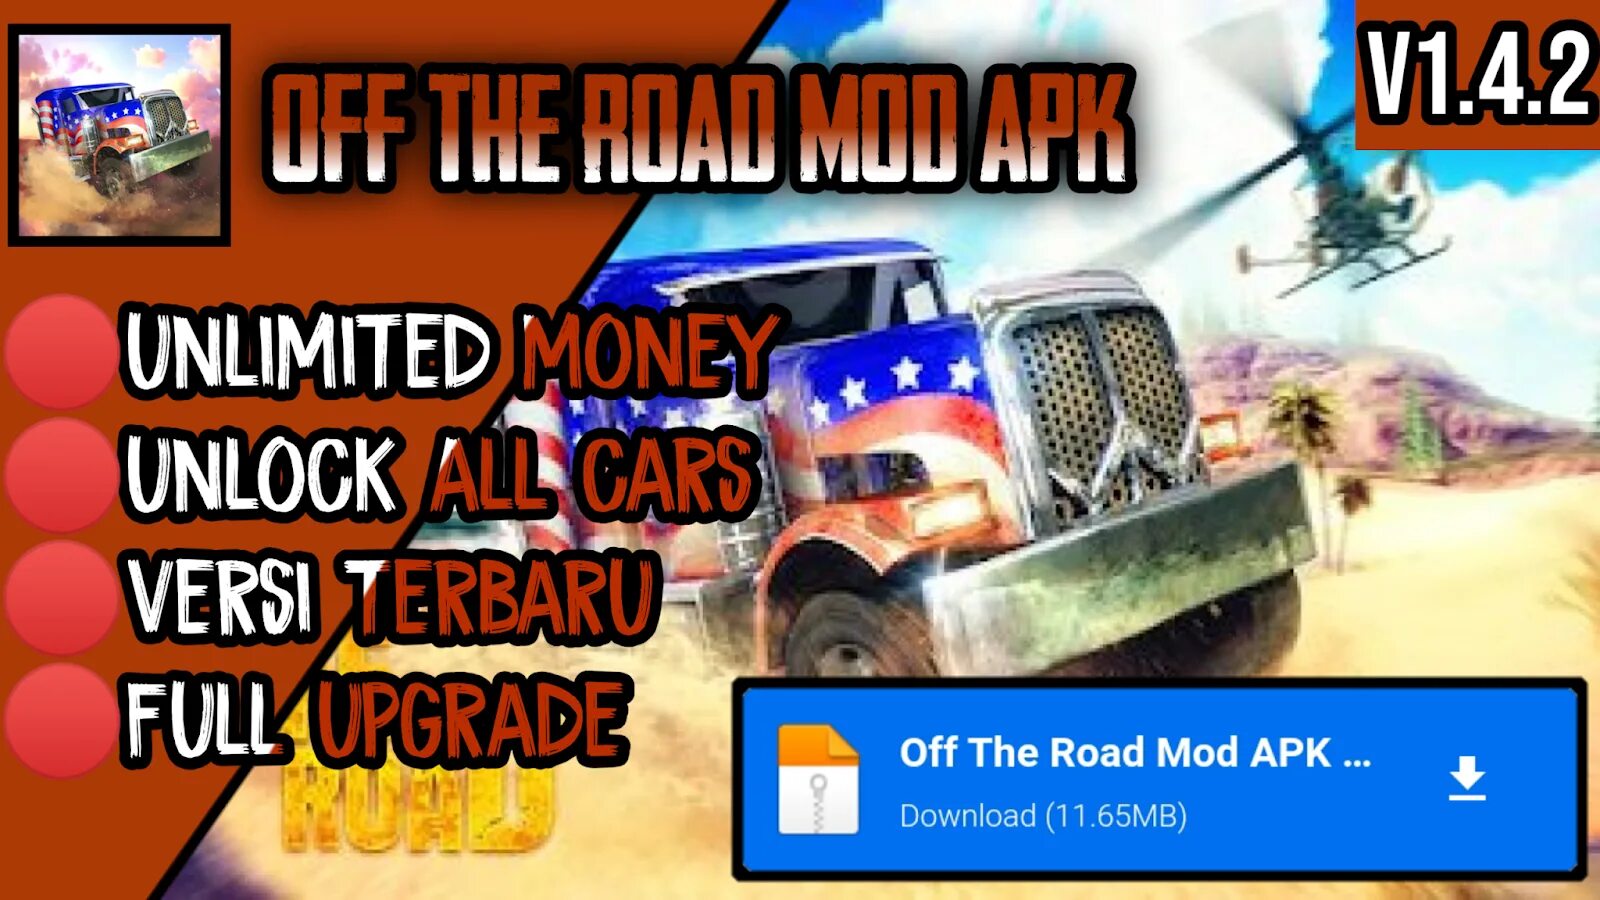 Off the road взломка. Off the Road Mod APK. Of the Road мод меню на машины. Off the Road мод на оружие. Off the Road русский и много денег.